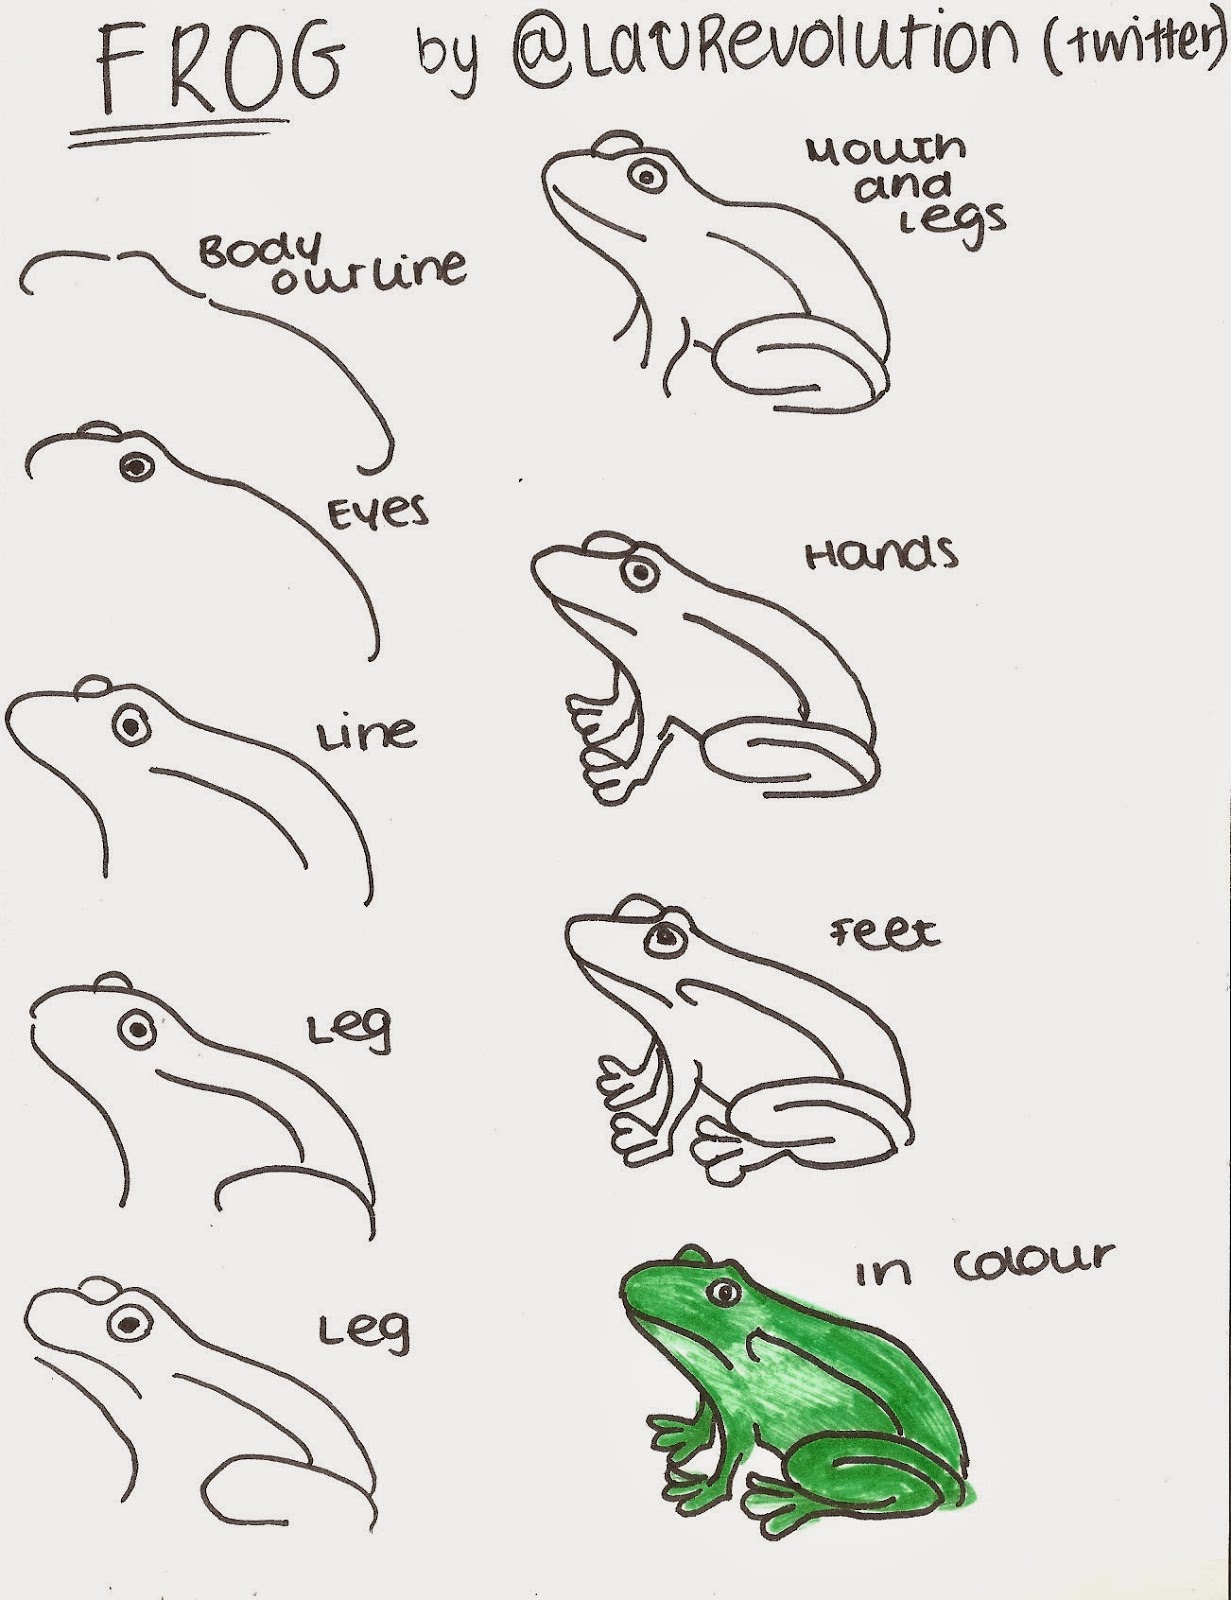 How to draw a Frog